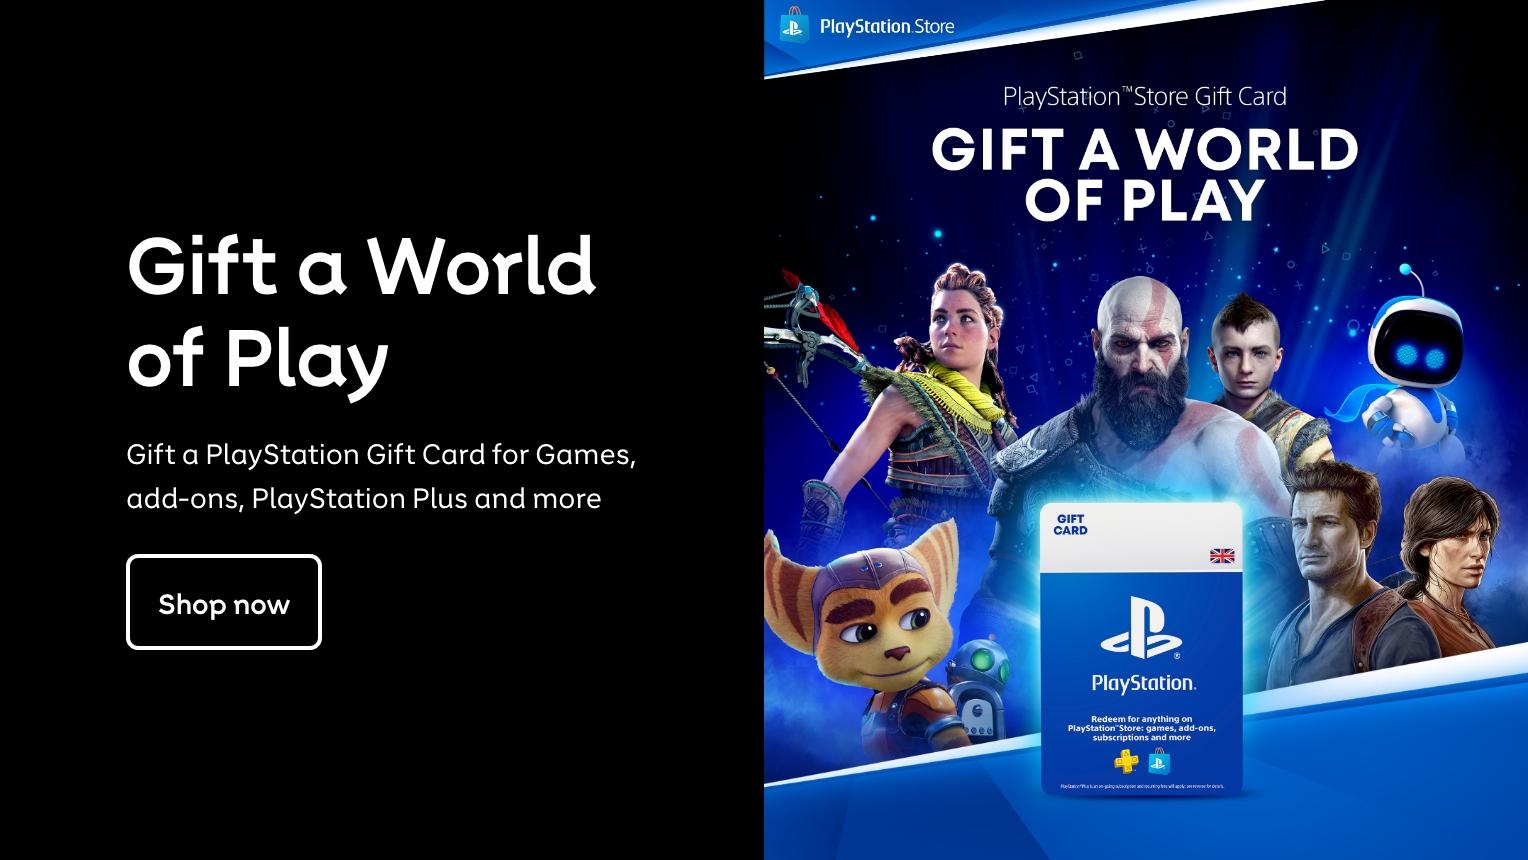 Gift a World of Play Gift a PlayStation. Gift Card for Games, add-ons, PlayStation Plus and more. Shop now